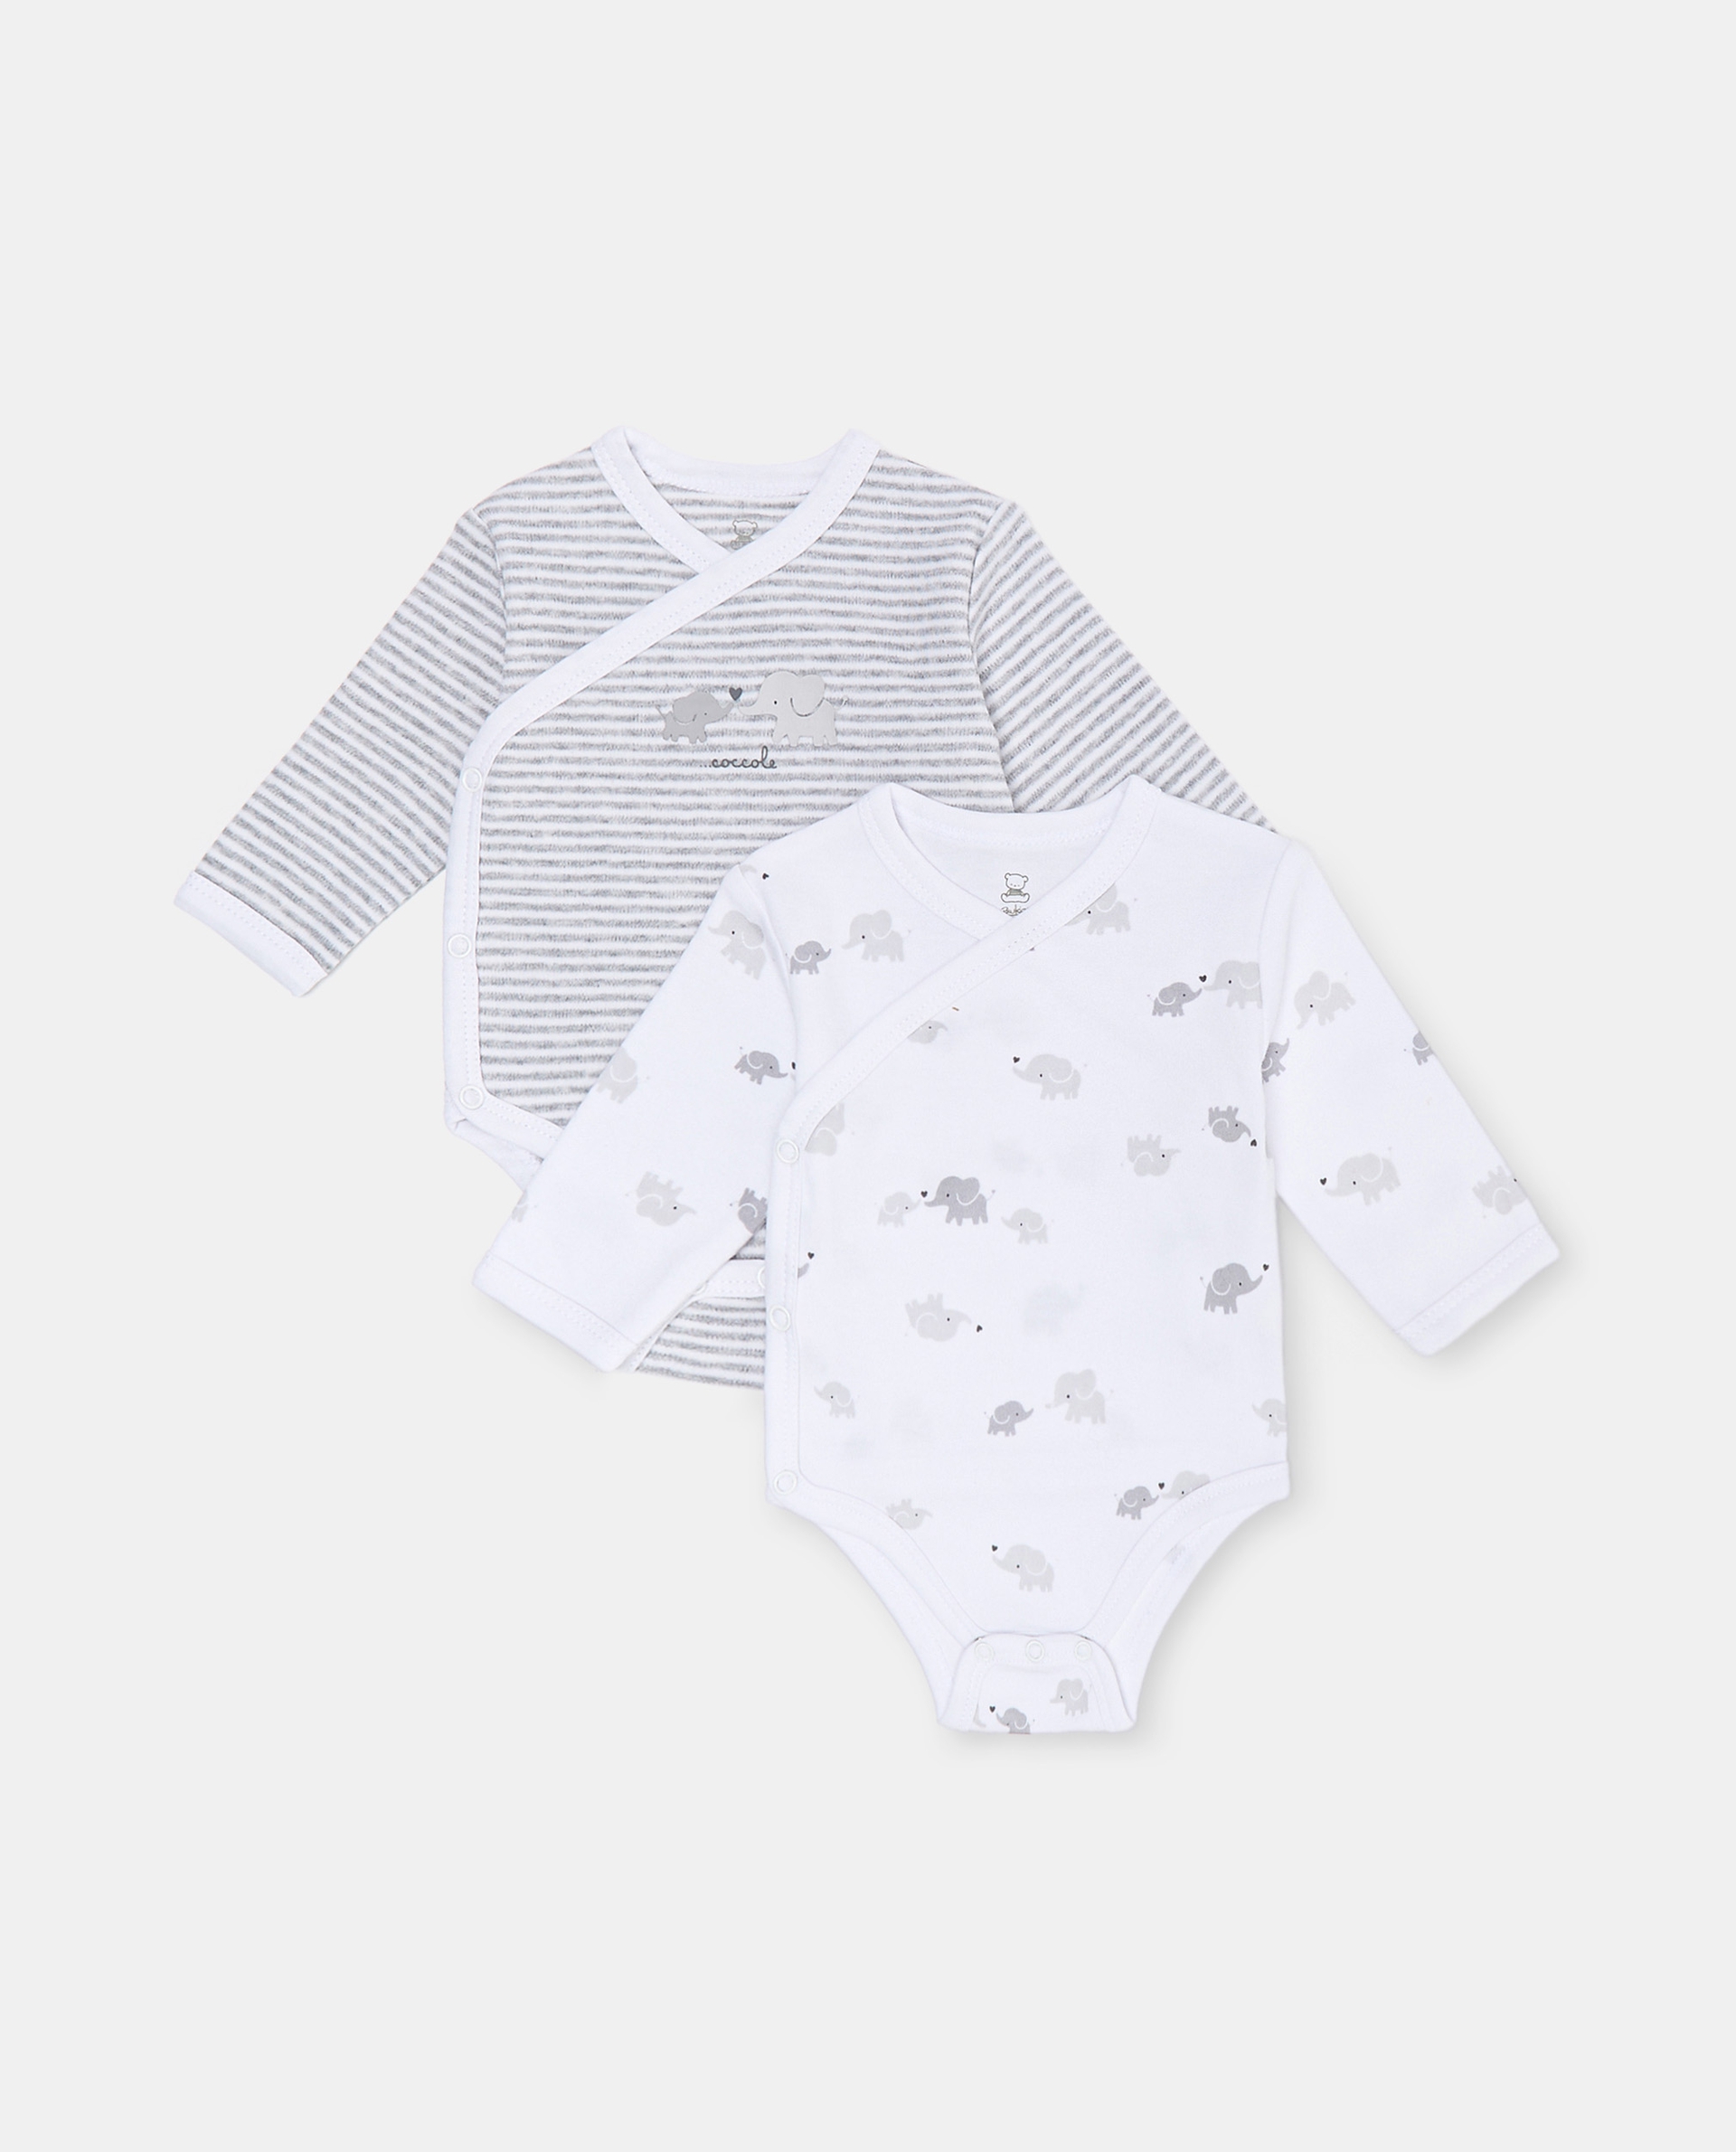 PACK 2 LONG SLEEVE BODYSUIT IN PURE COTTON FOR BABIES